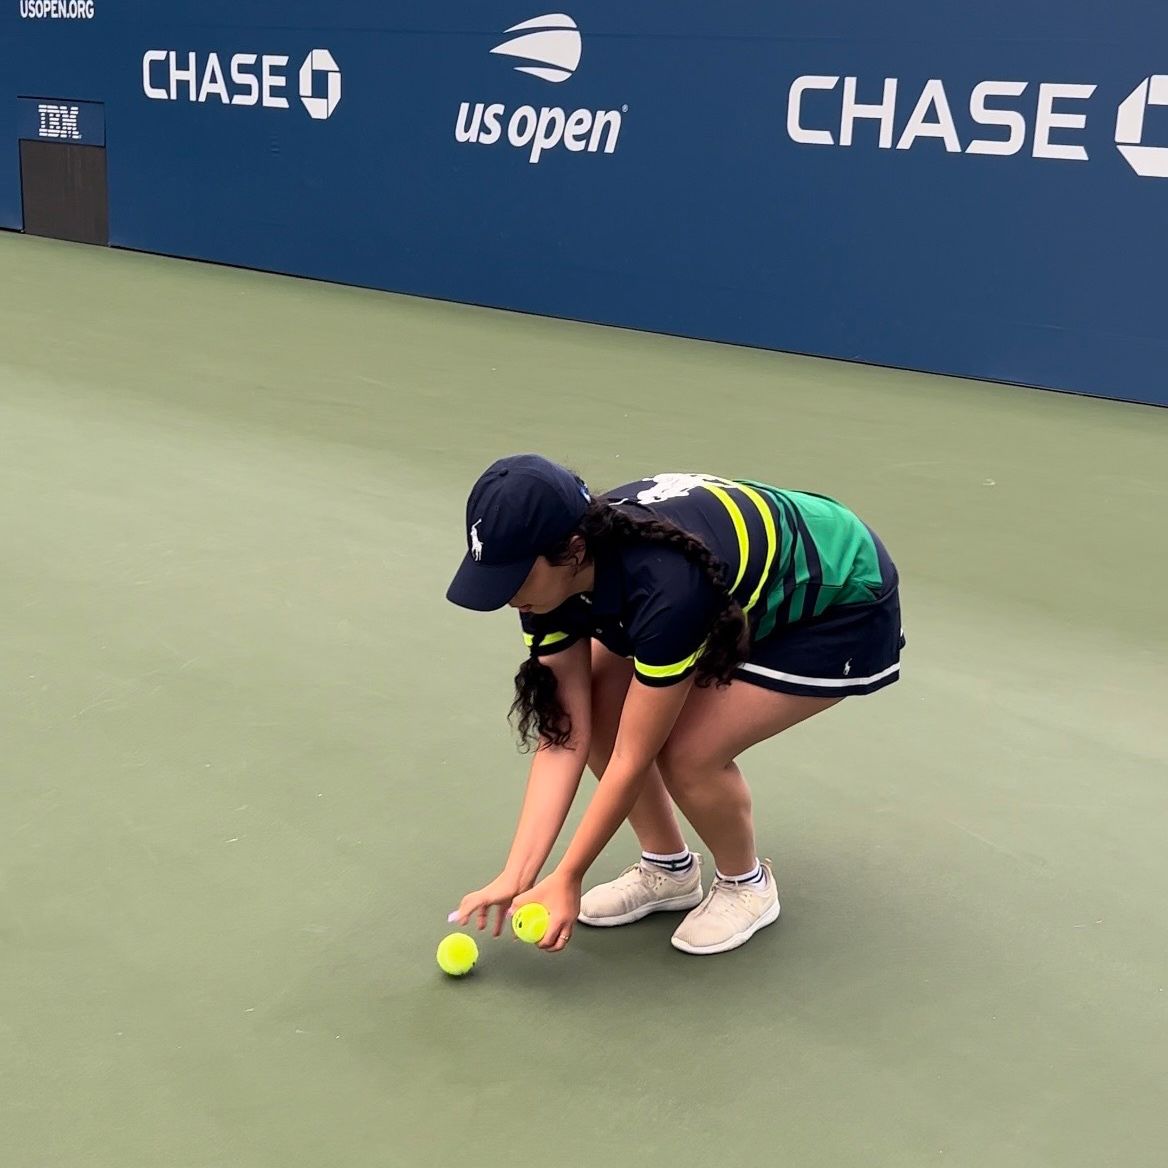 I Tried Out to Join the U.S. Open Ball Crew